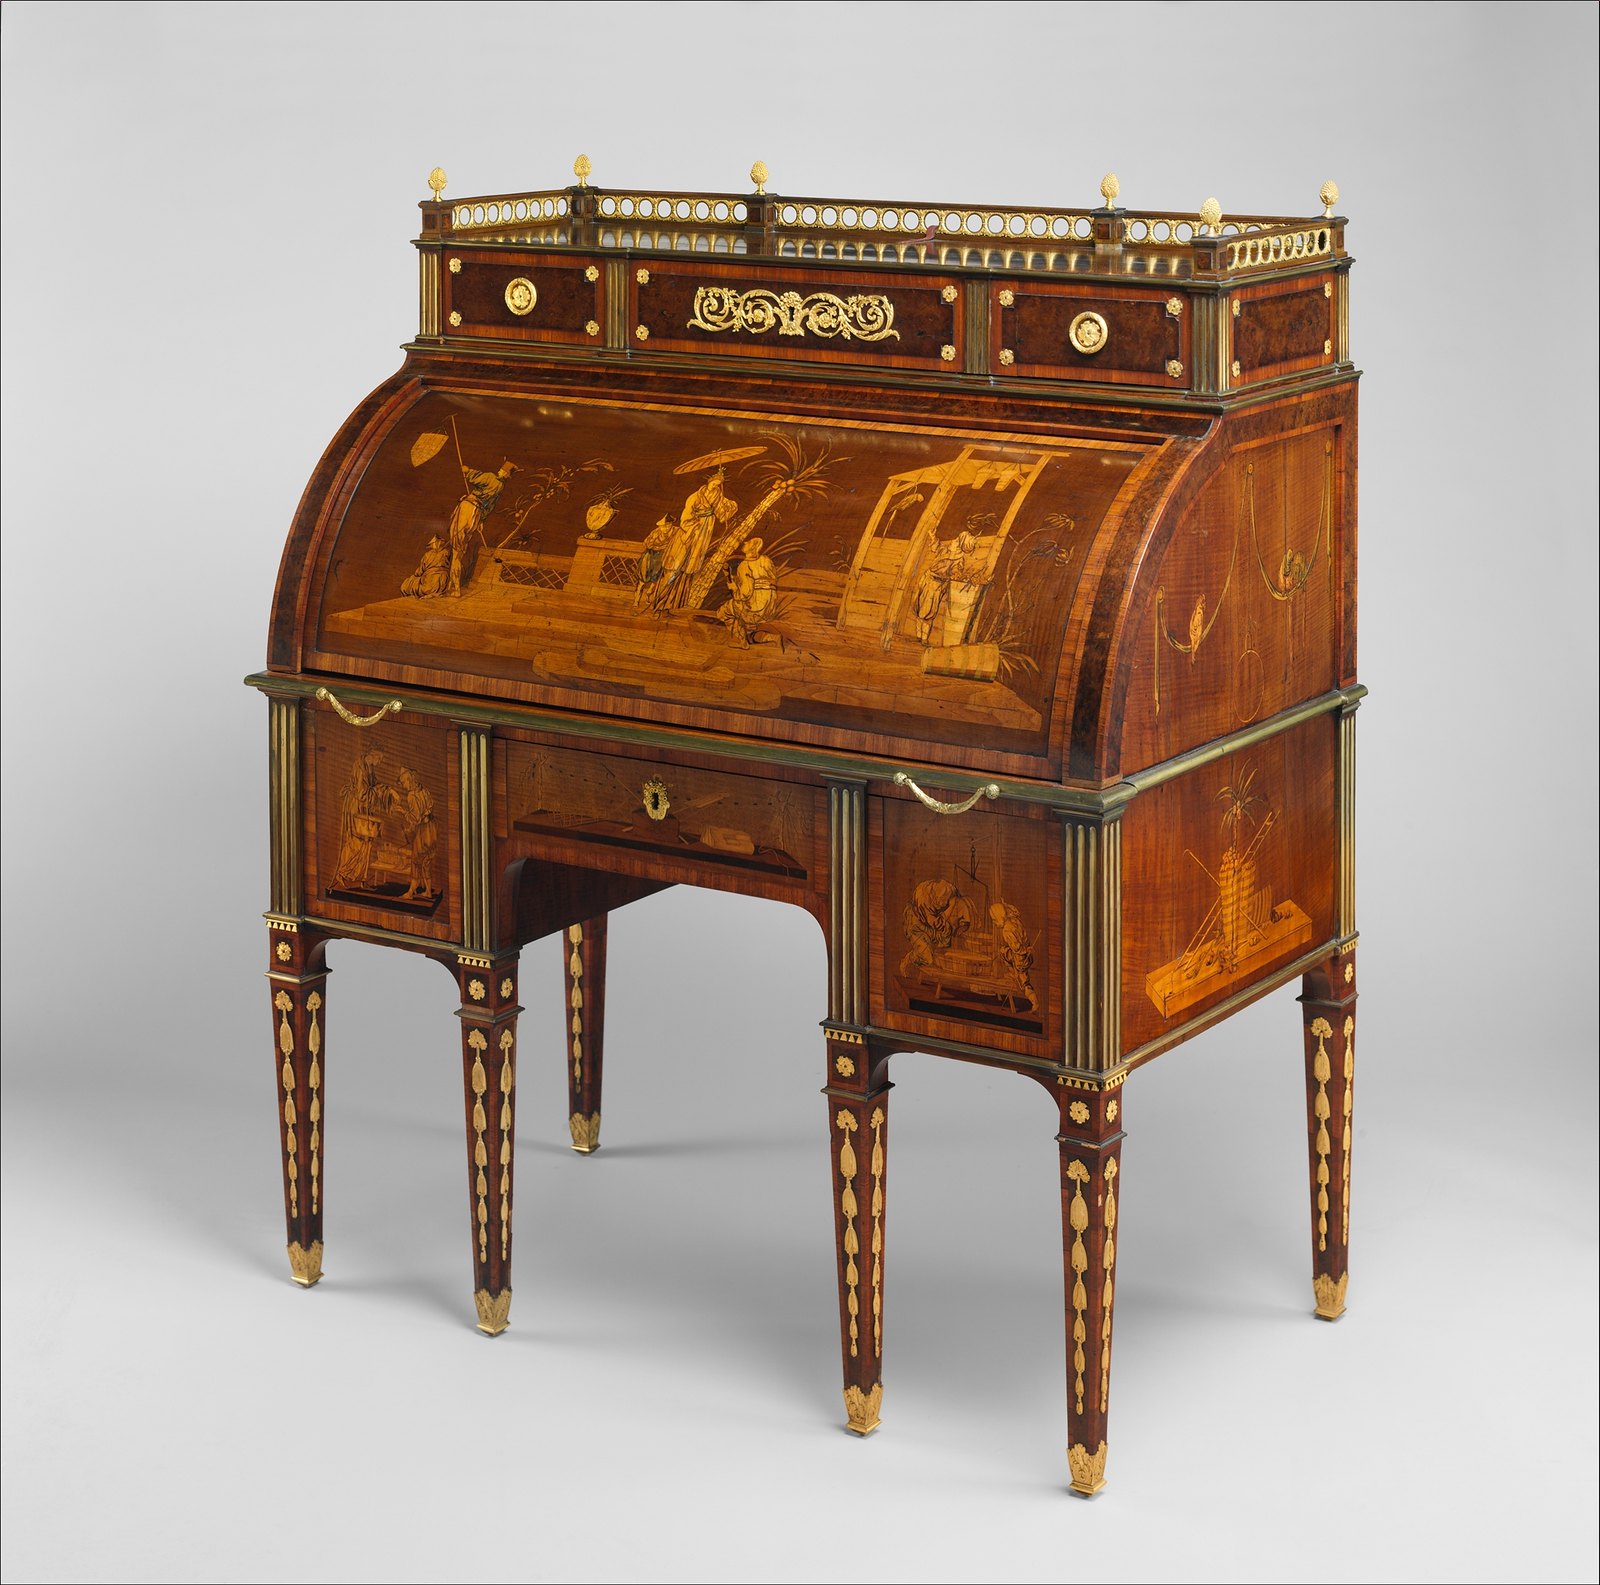 1776 Rolltop Desk. German. Oak, cherry, pine, mahogany, veneered with maple, burl woods, holly, hornbeam (all partially stained), tulipwood, mahogany, and other woods; mother-of-pearl; partially gilded and tooled leather; gilt bronze, iron, steel, brass, partially gold-lacquered brass. metmuseum